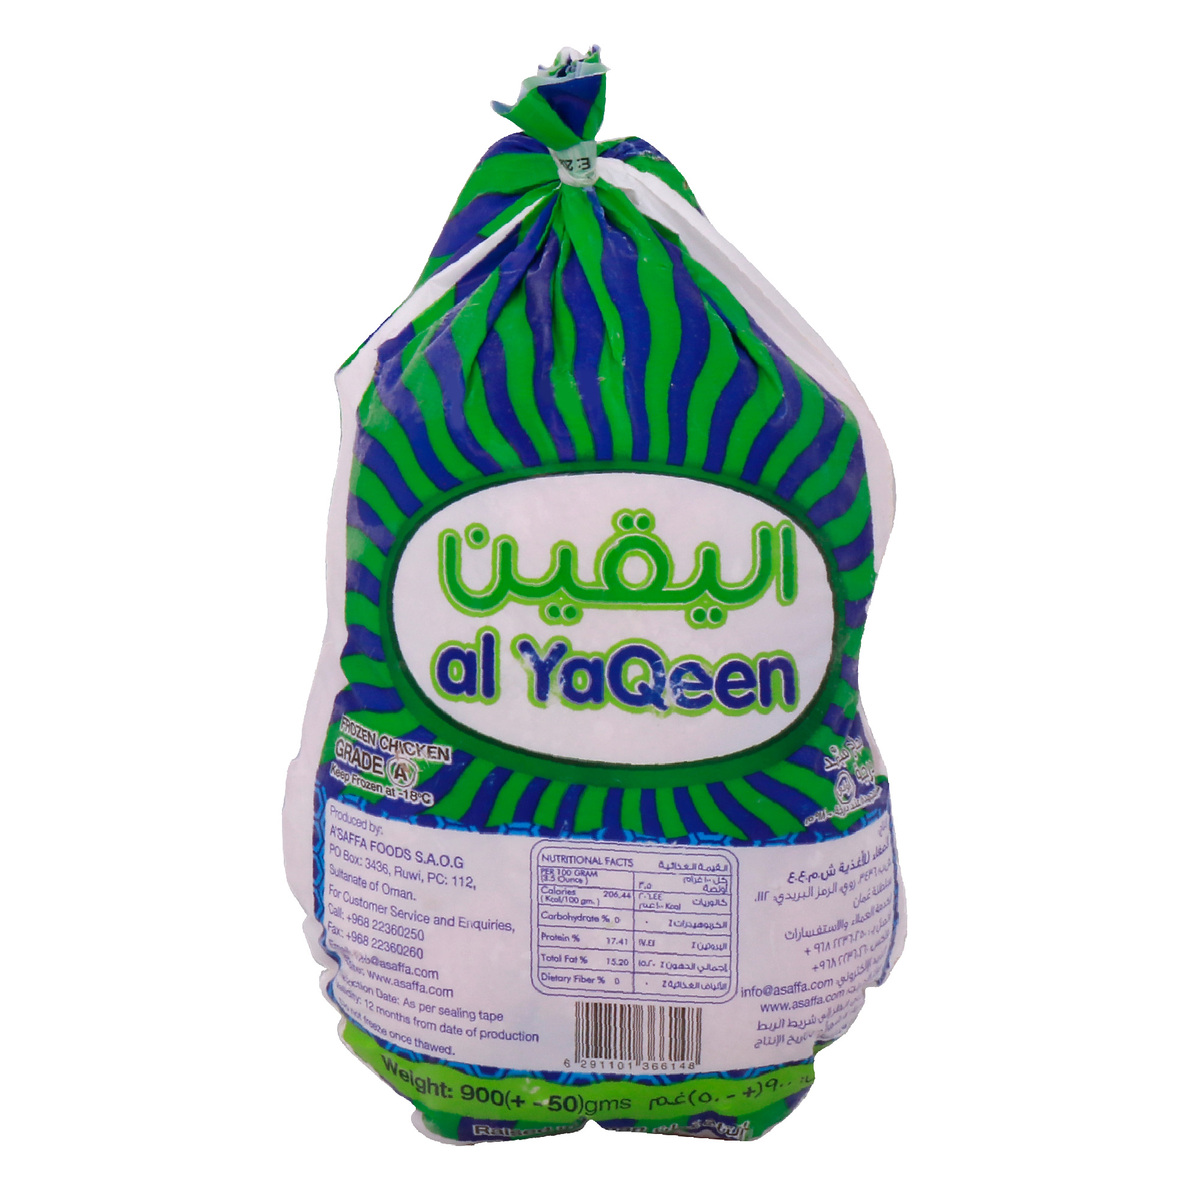 Al Yaqeen Whole Chicken 10 x 900g